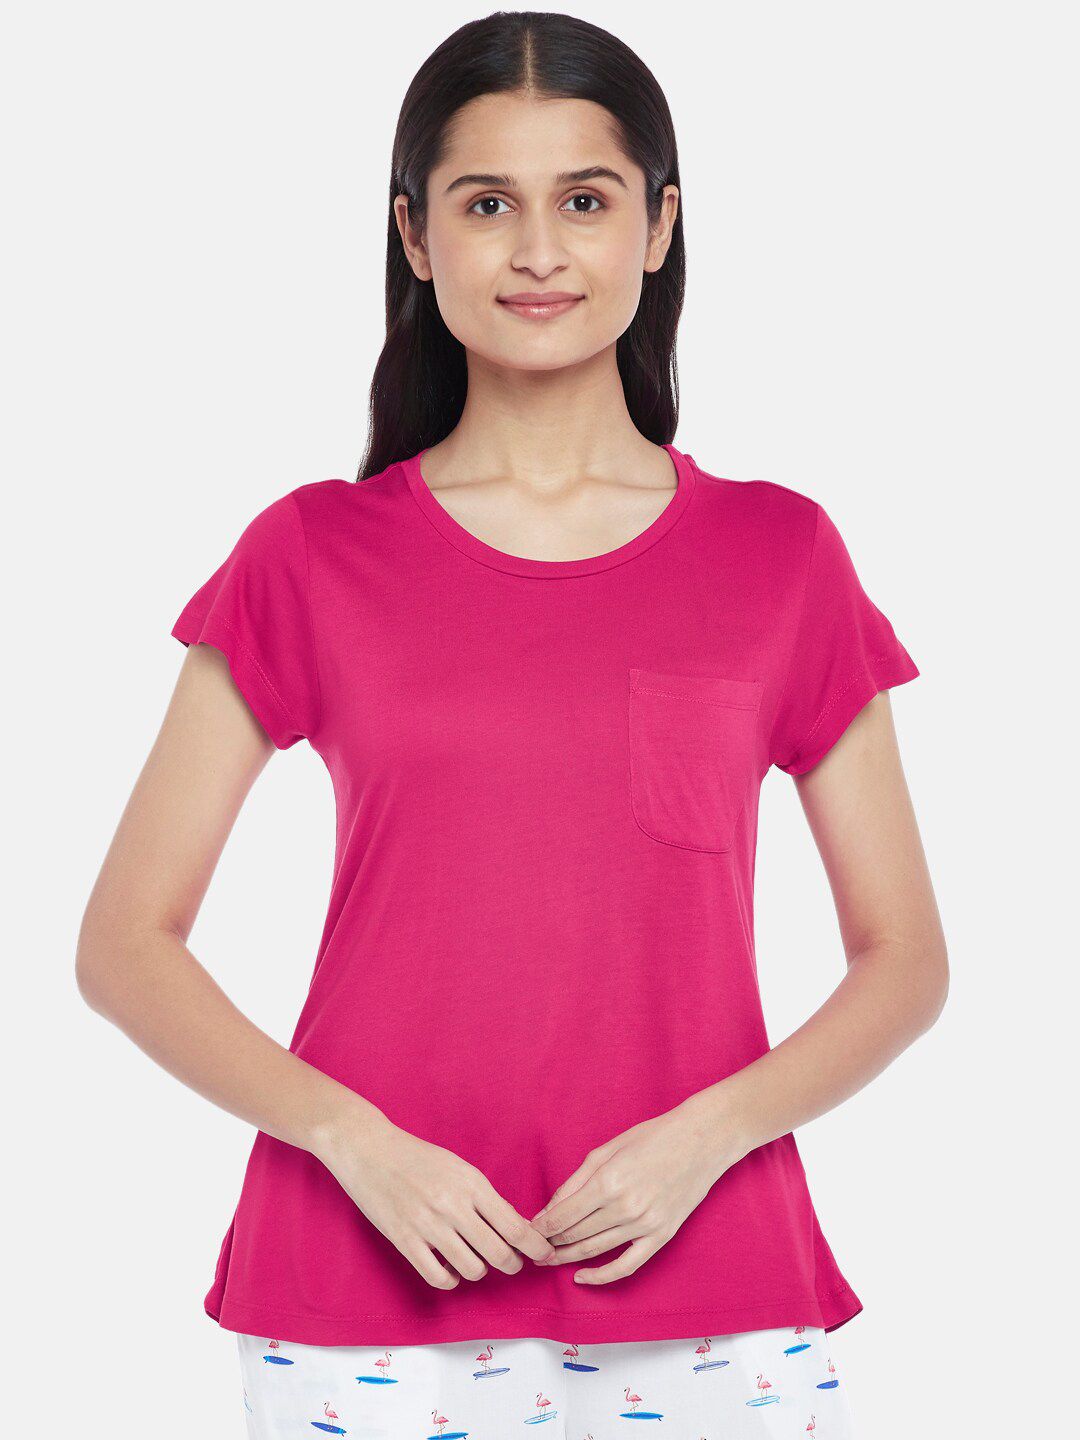 Dreamz by Pantaloons Pink Knitted Lounge tshirt Price in India